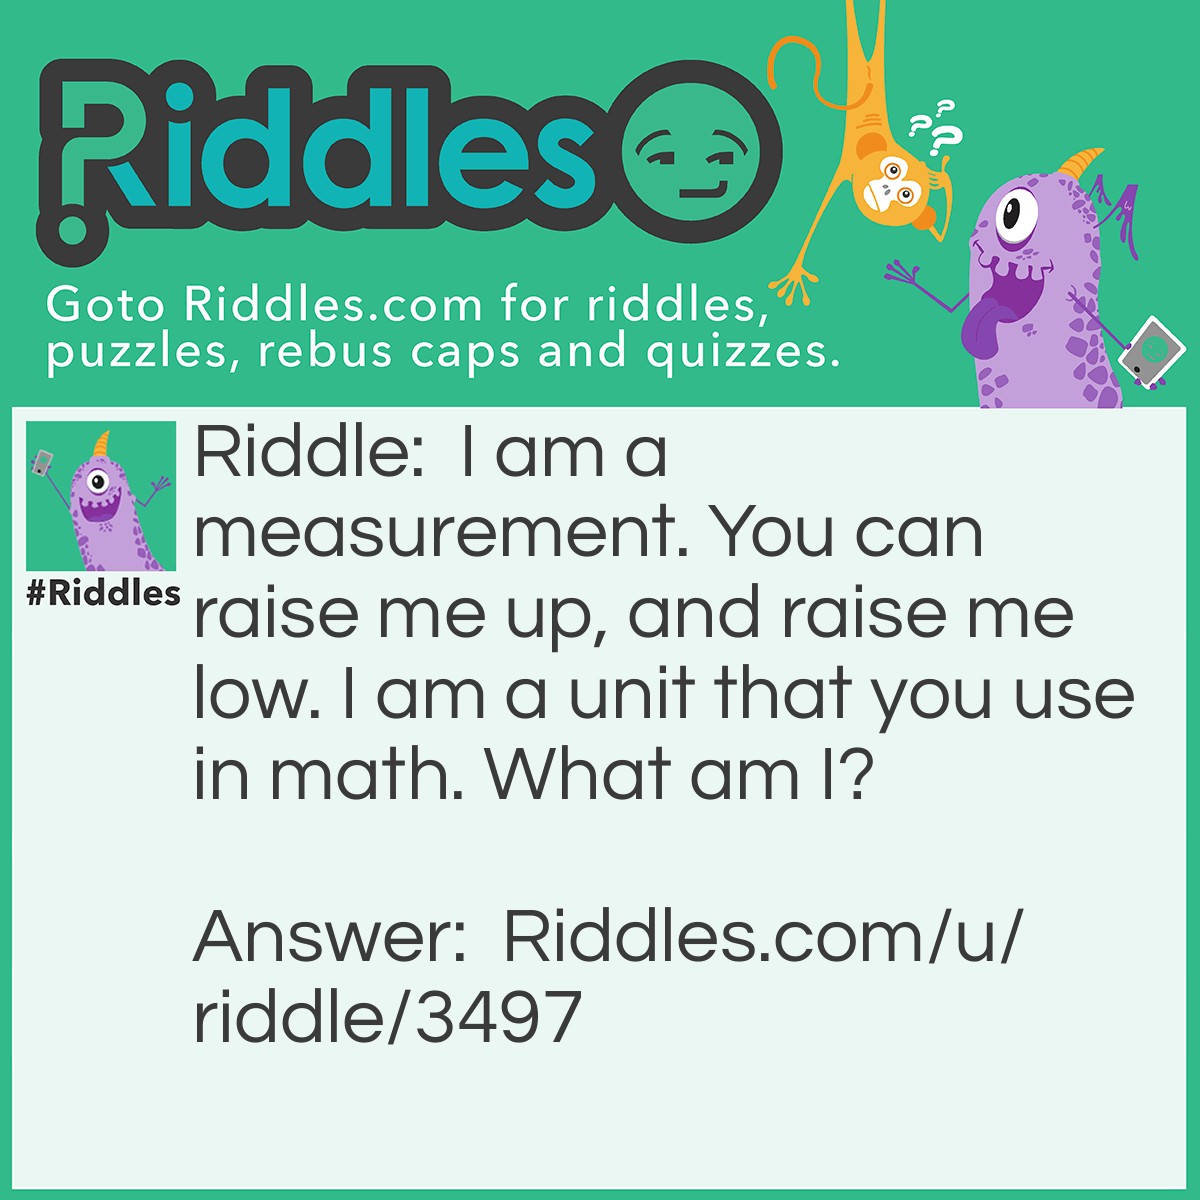 Riddle: I am a measurement. You can raise me up, and raise me low. I am a unit that you use in math. What am I? Answer: Volume.